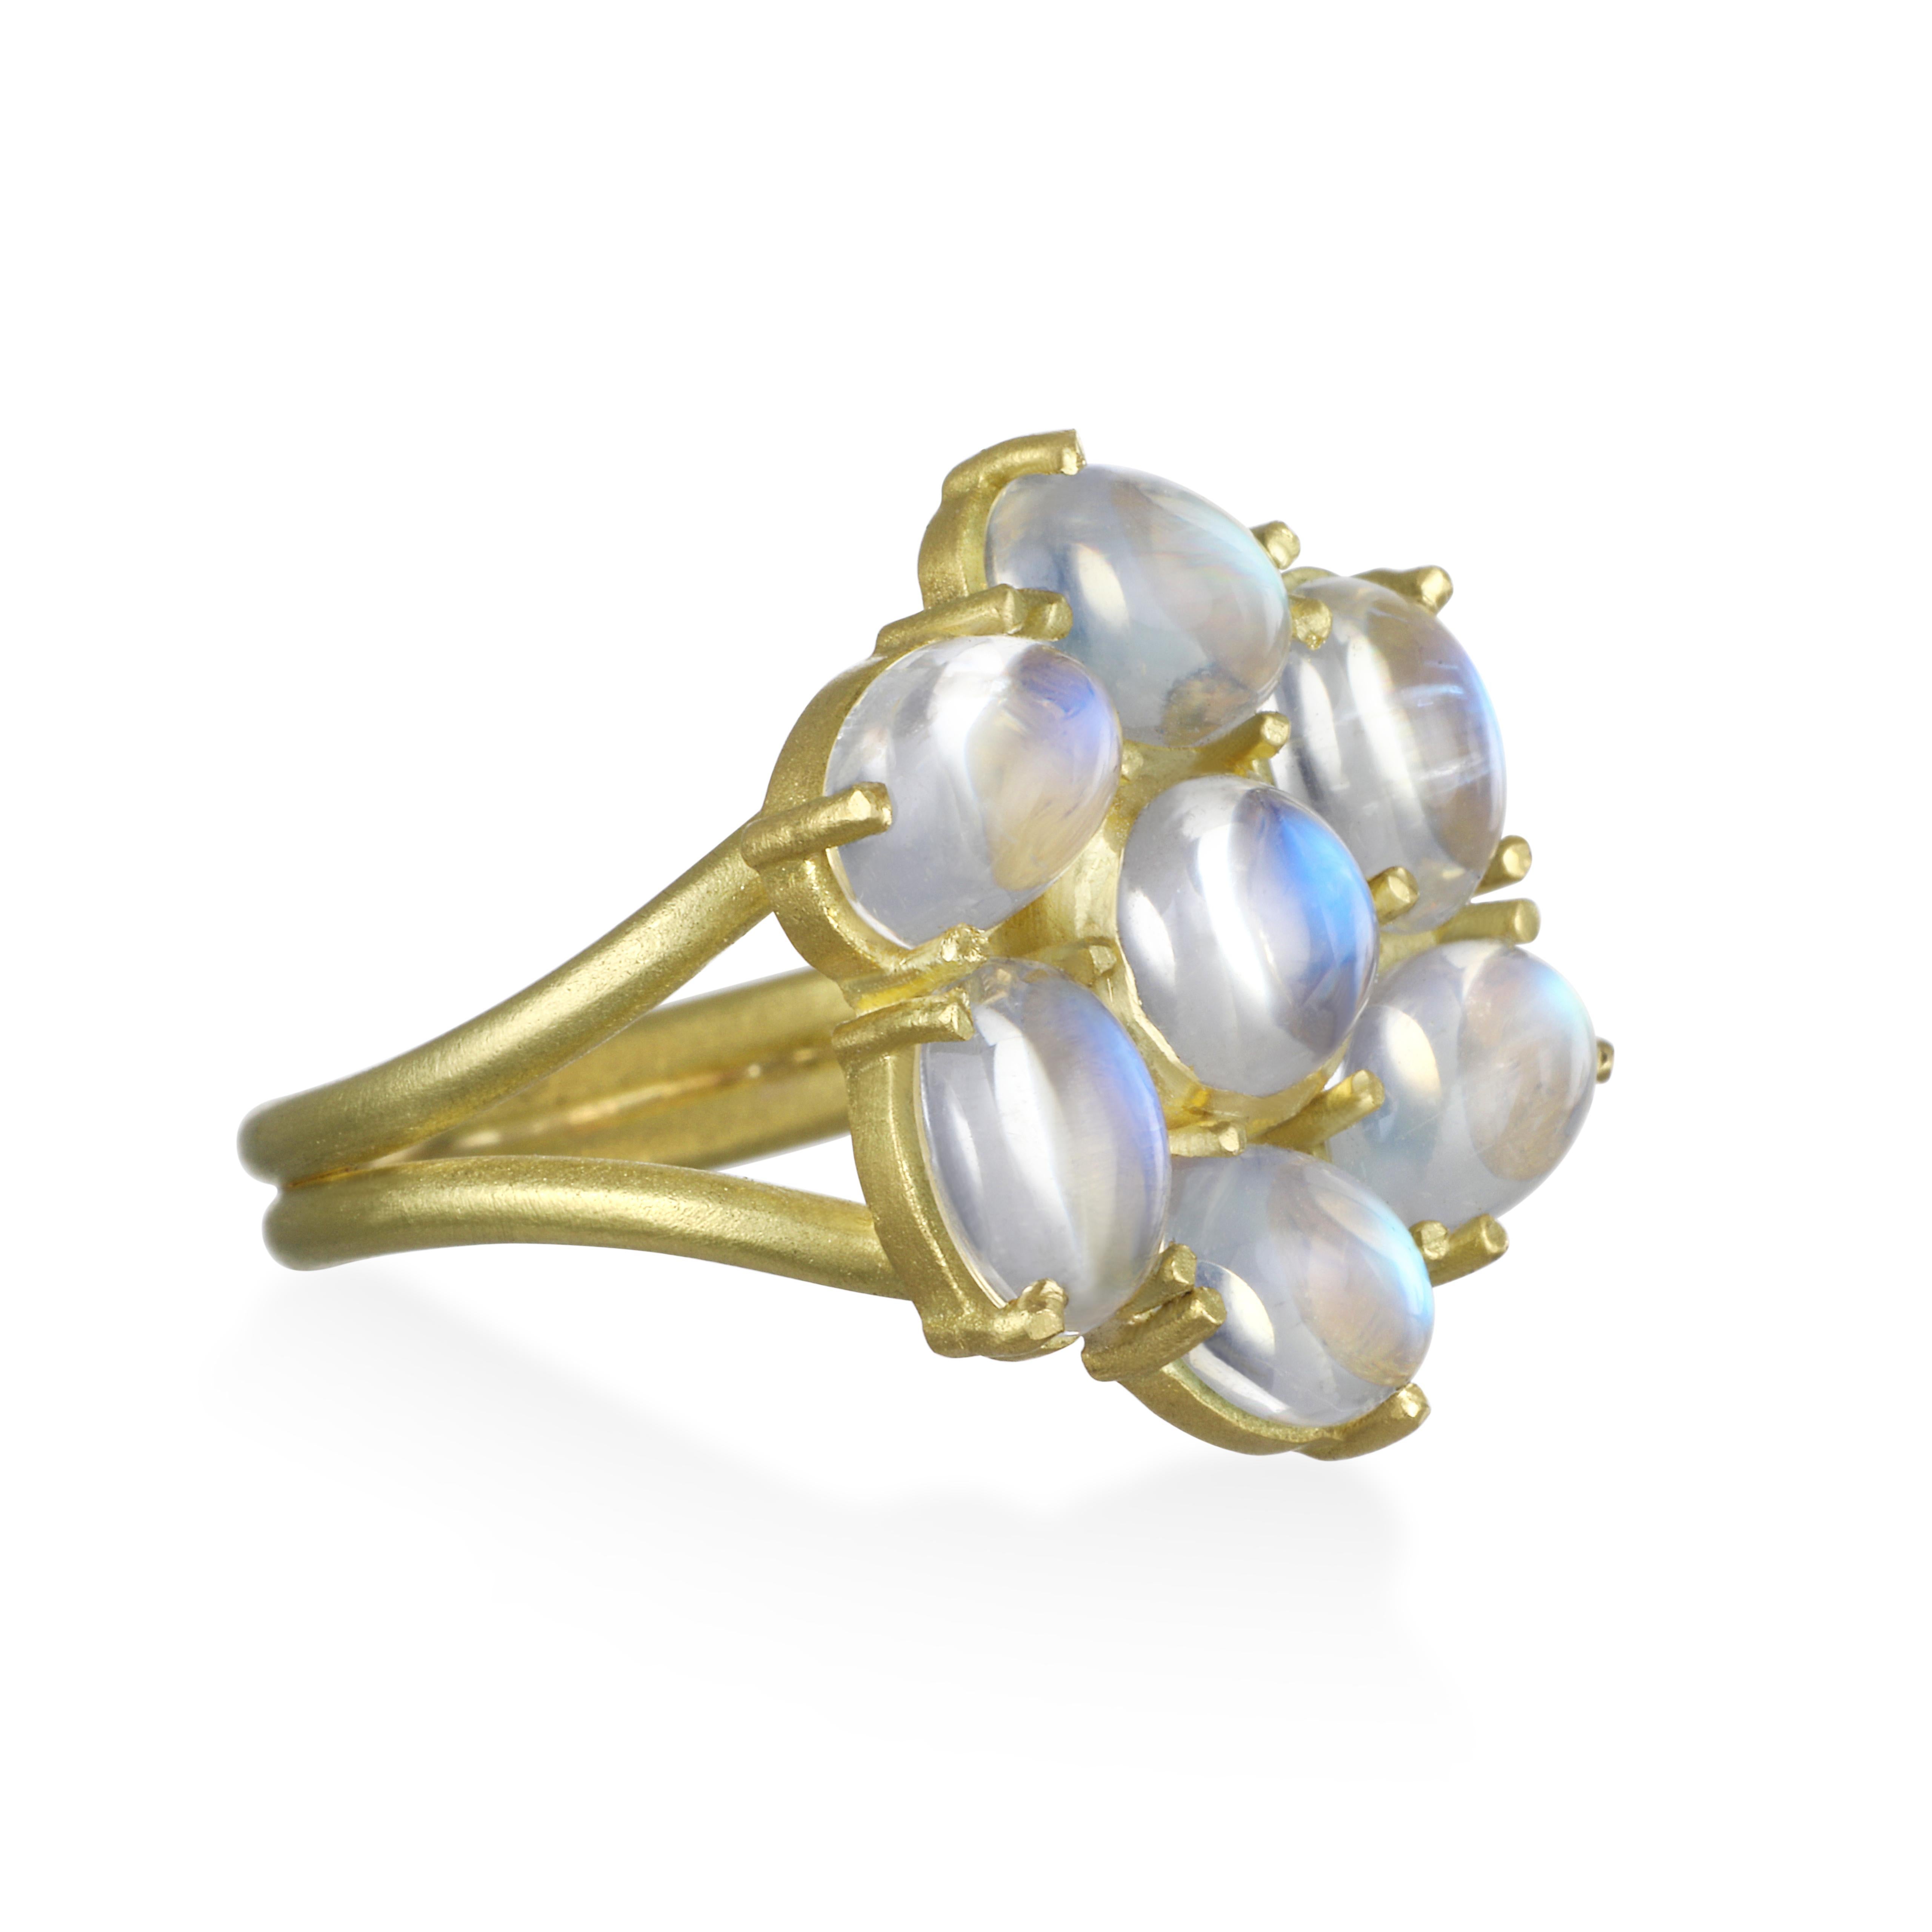 Beauty and comfort come together in Faye Kim's 18 Karat Gold Ceylon Blue Moonstone Ring. Known for its adularescence, the blue flash from Ceylon moonstones adds to the overall mystique surrounding moonstones. Matte finish.

Diameter: .75